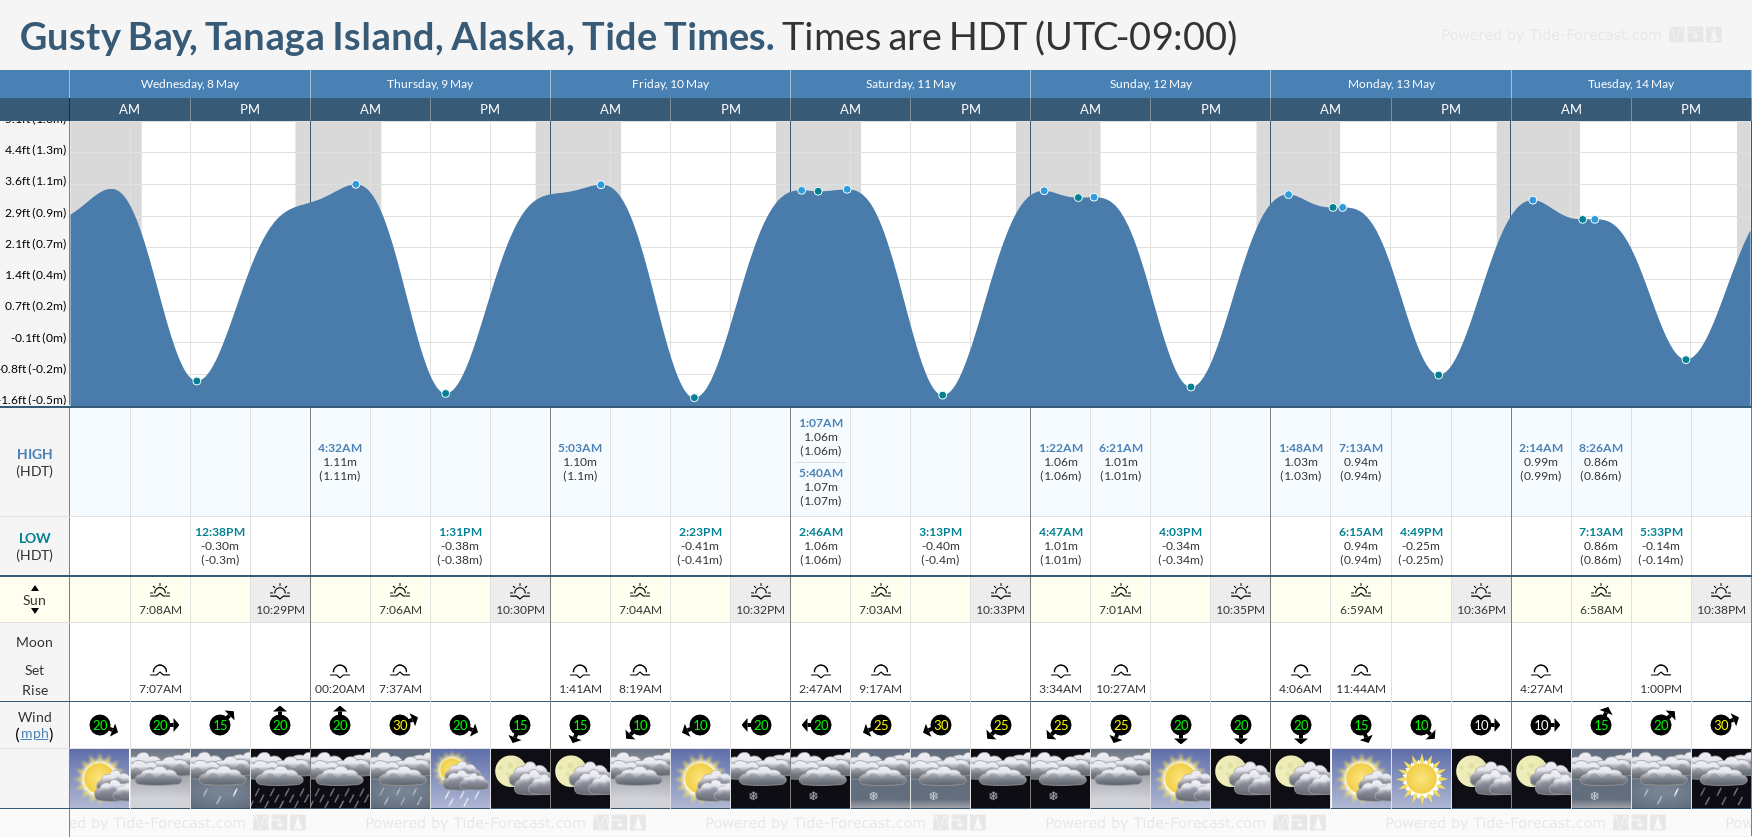 Gusty Bay, Tanaga Island, Alaska Tide Chart including high and low tide tide times for the next 7 days